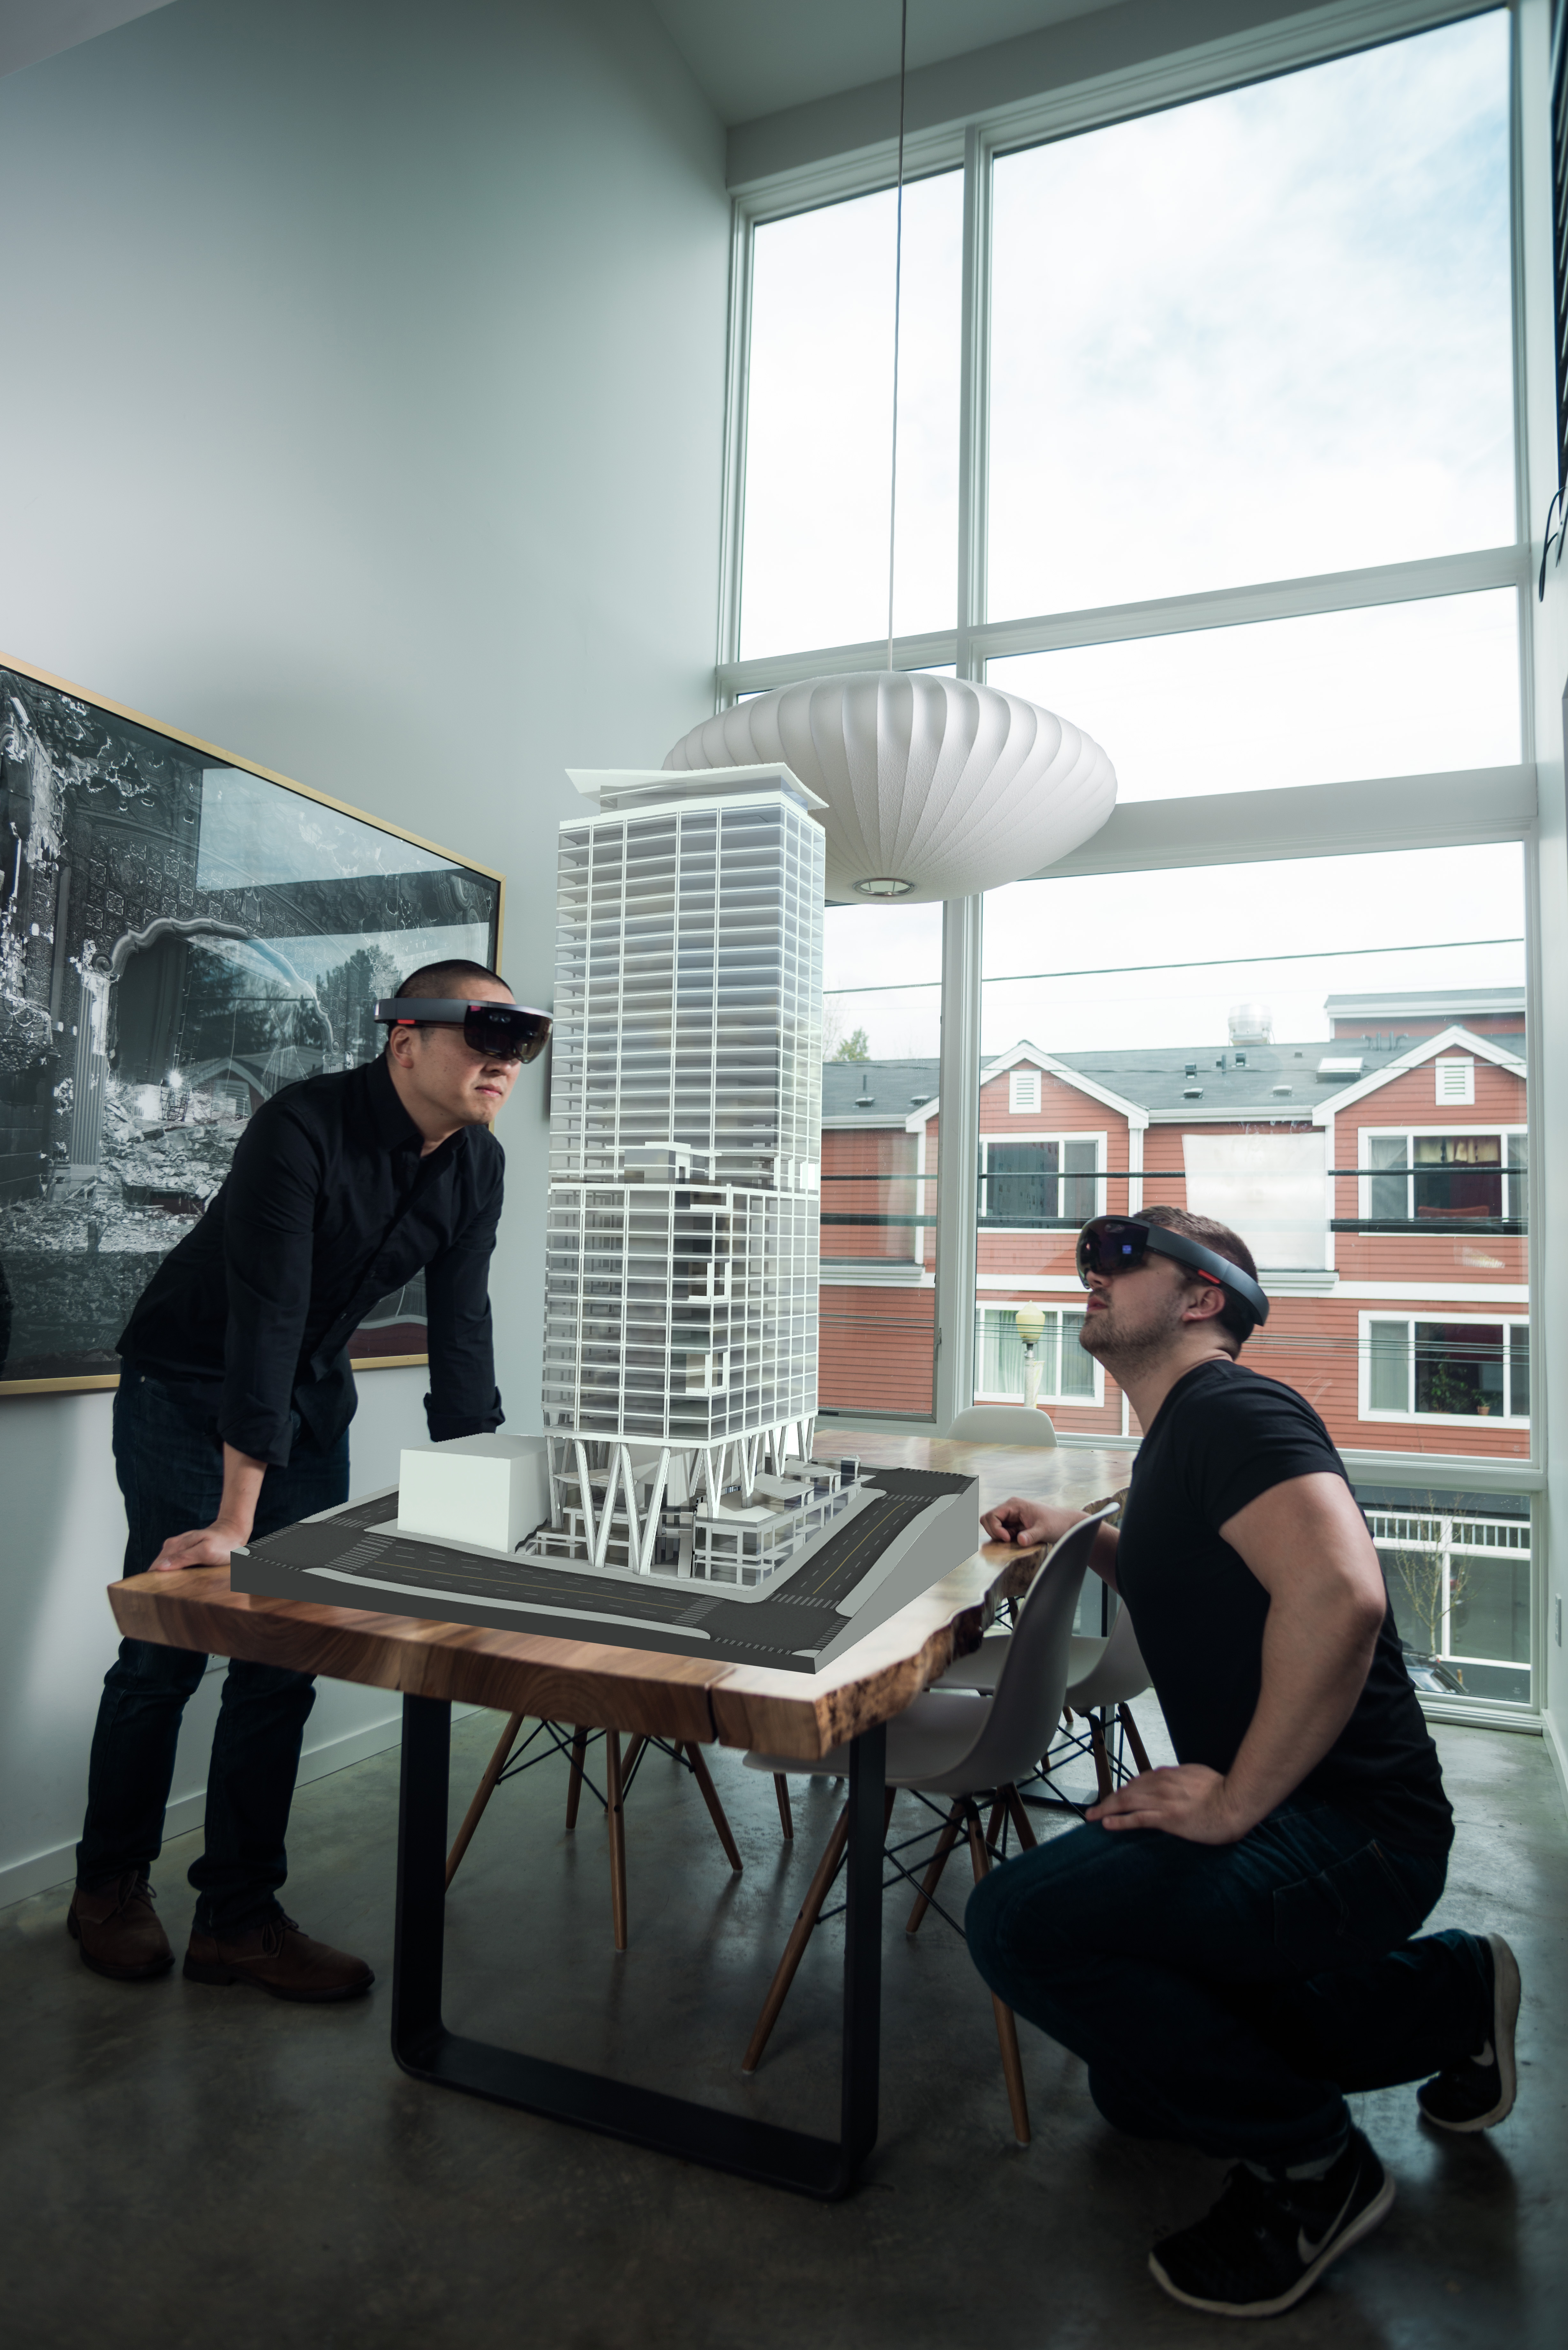 Microsoft HoloLens helps make the first holographic 